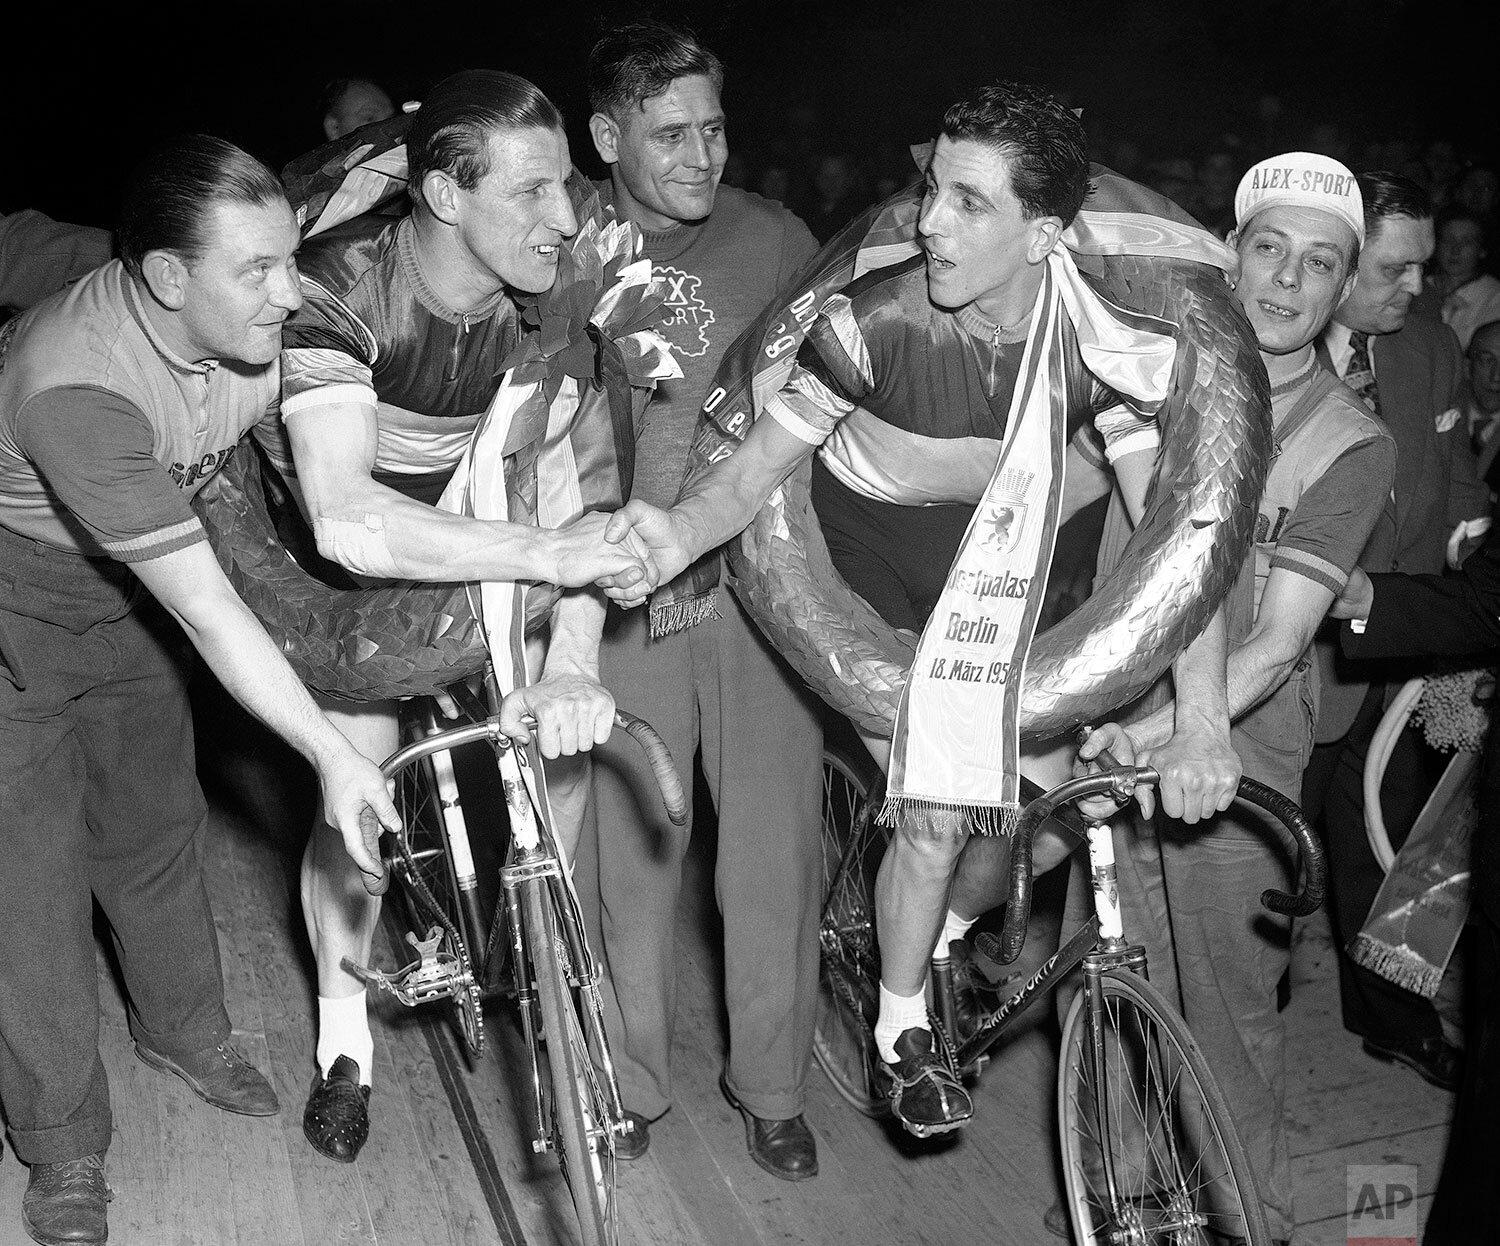  Gerrit Peters, left, and Gerrit Schulte, both of the Netherlands, shake hands after winning Berlin’s, Germany, six-day cycle race in the Sports Palace on March 18, 1954. (AP Photo/Heinrich Sanden) 